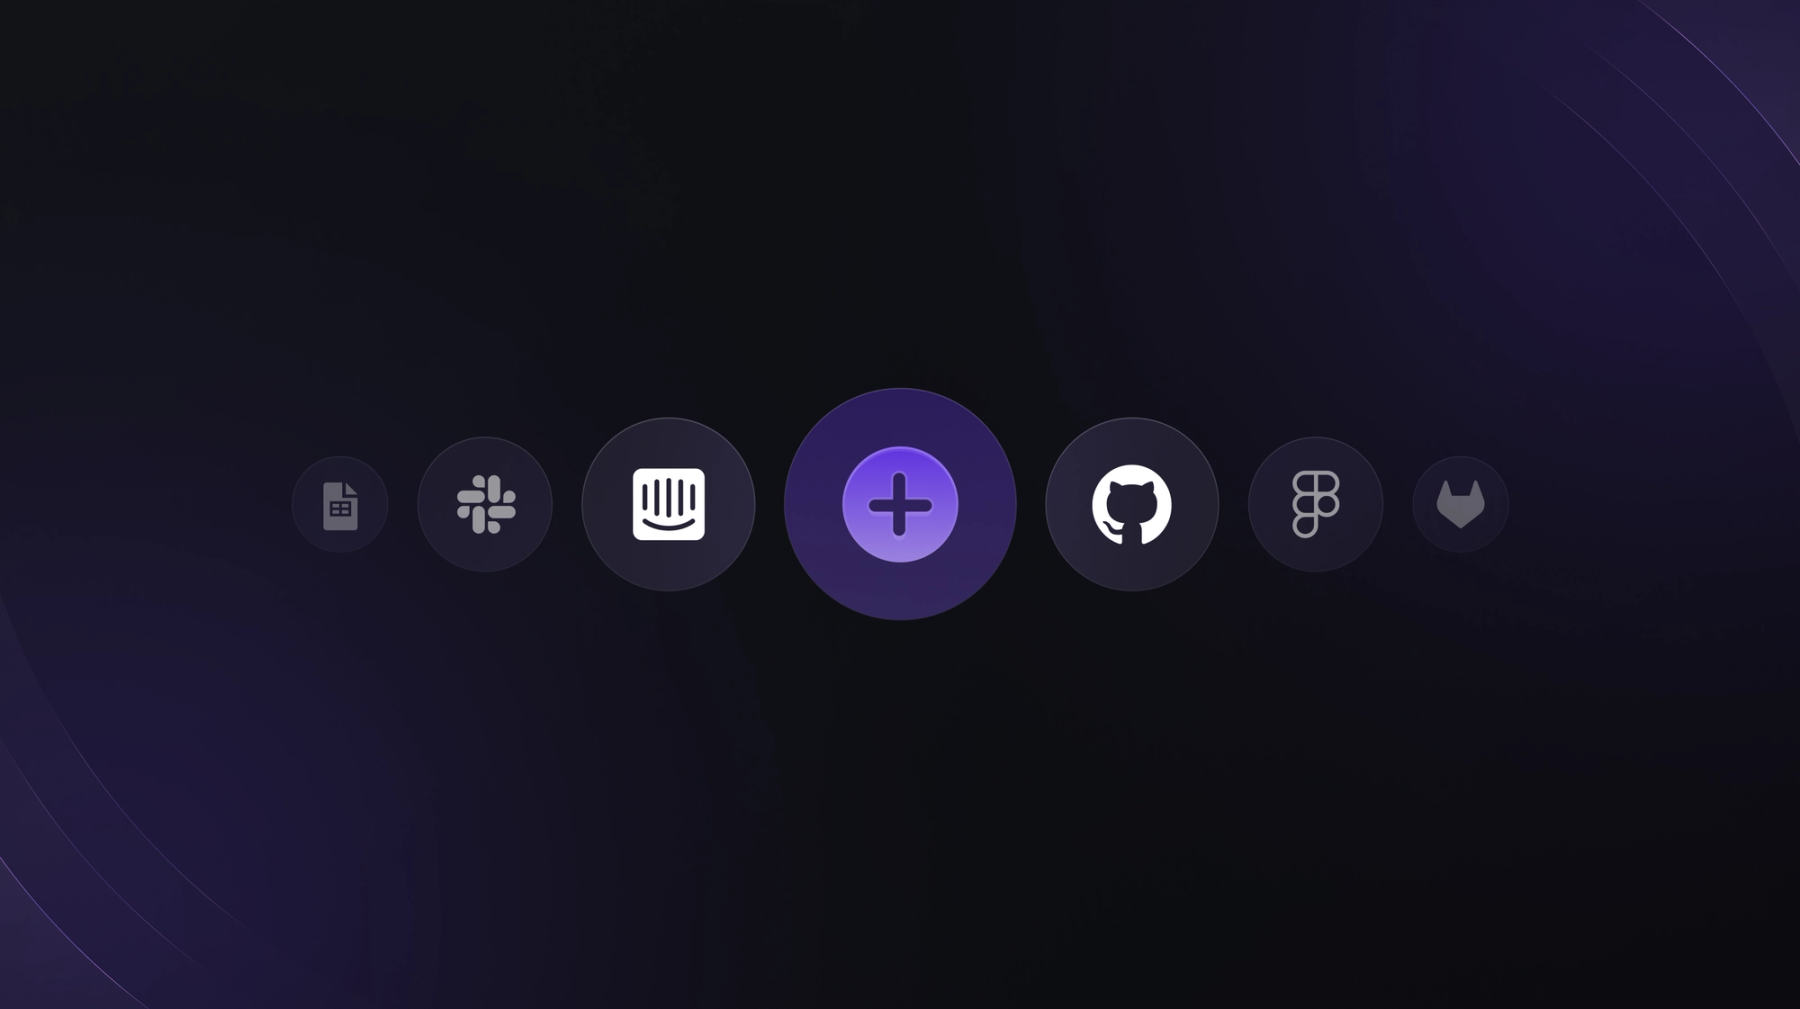 Icons from Linear integrations including GitHub, Slack, and Figma